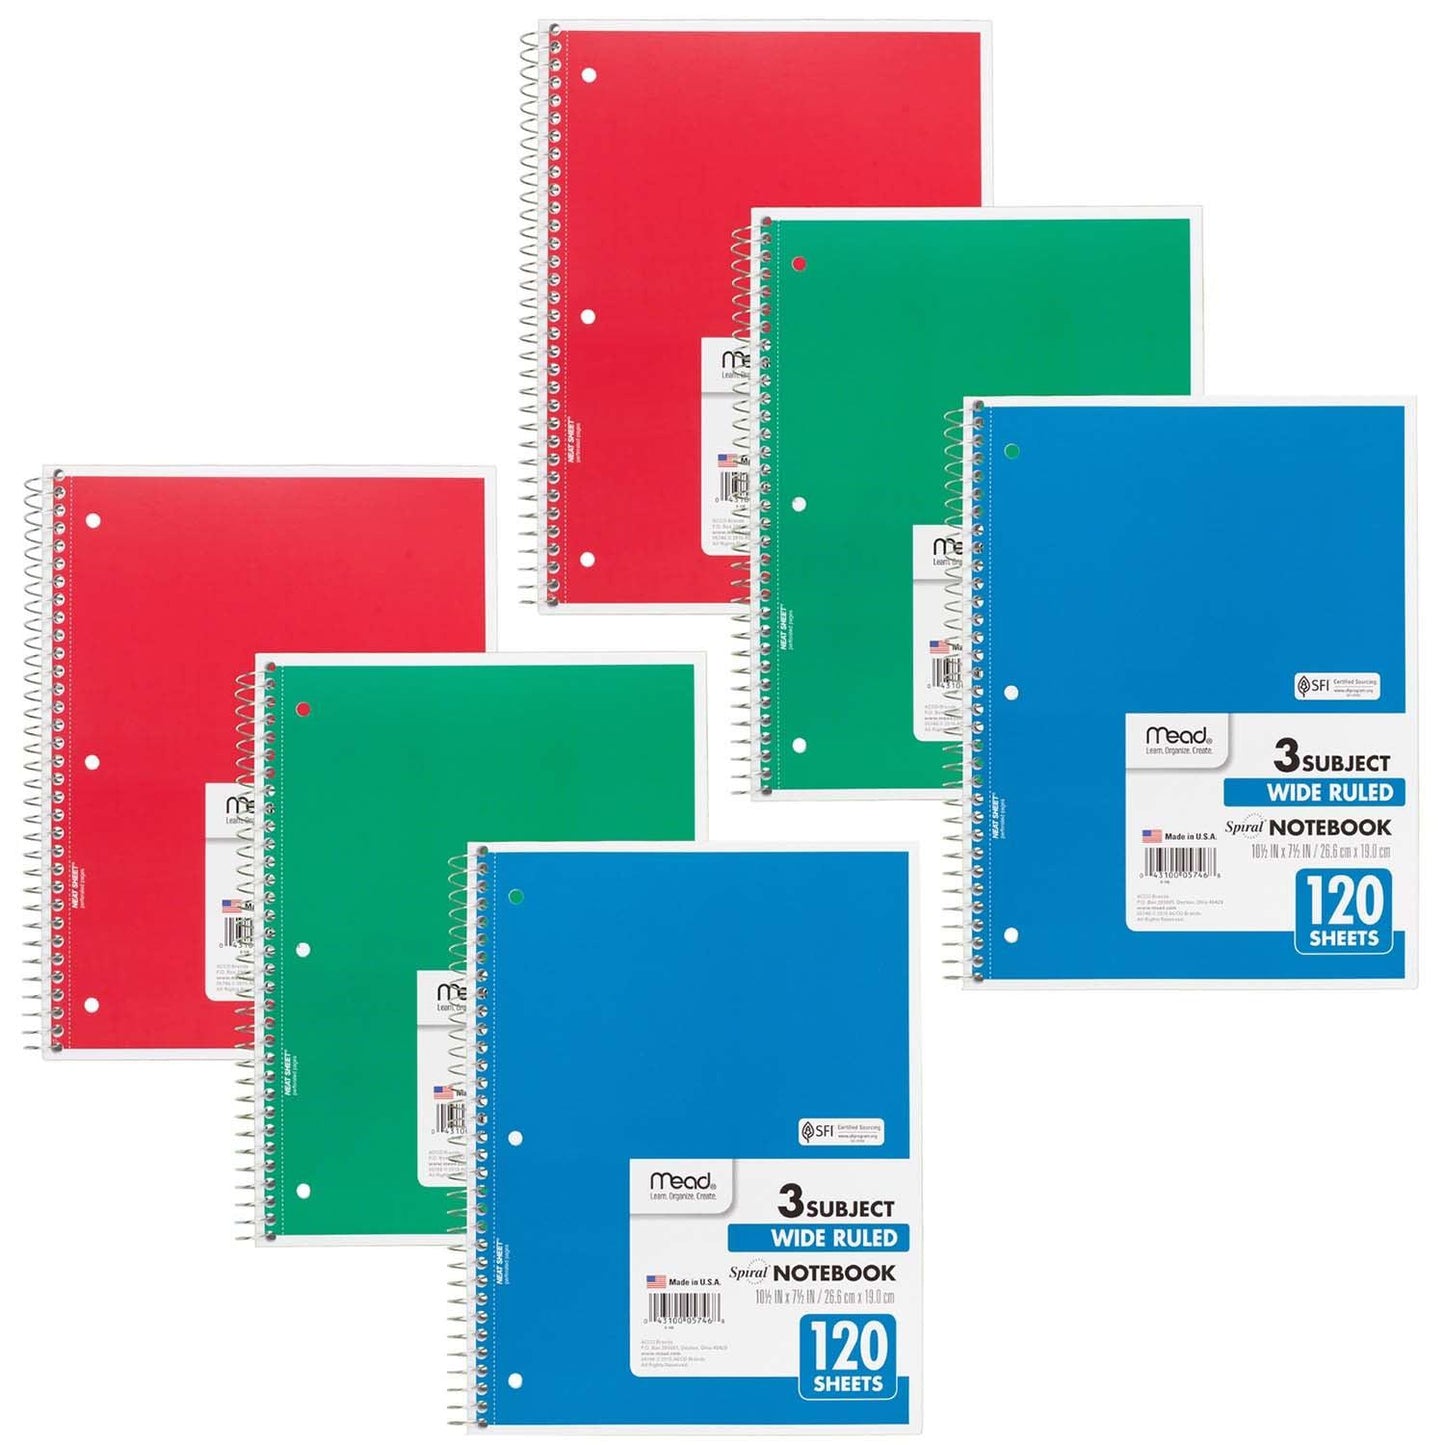 Spiral 3 Subject Notebook, Wide Ruled, 180 Sheets Per Book, Pack of 6 - Loomini